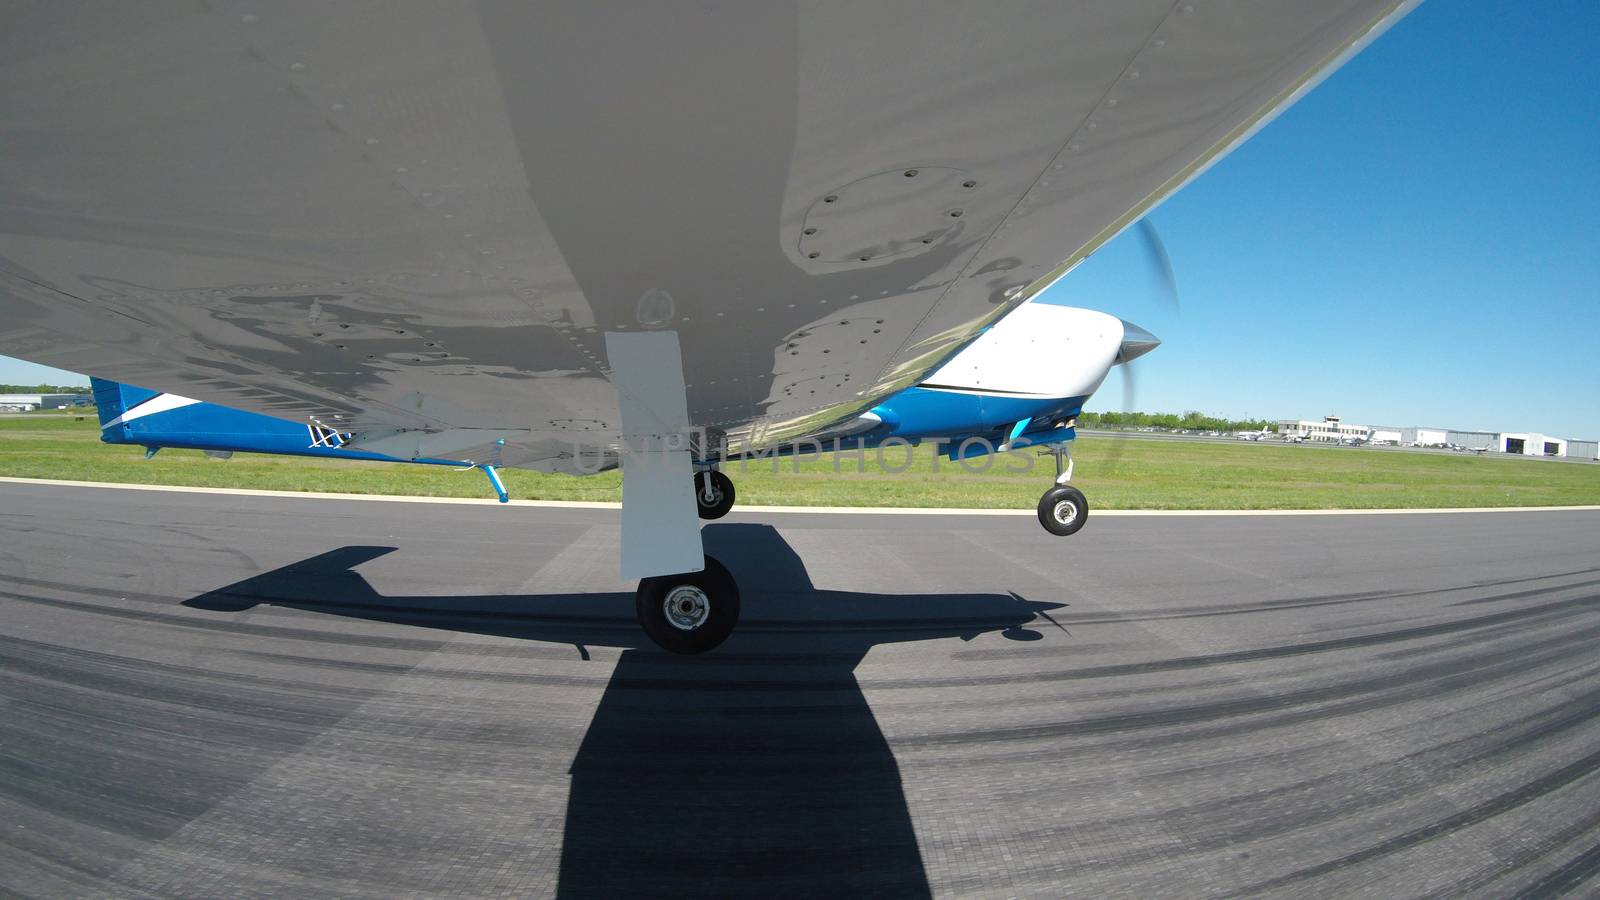 Views of a general aviation aircraft performing maneuvers on the ground and in the air